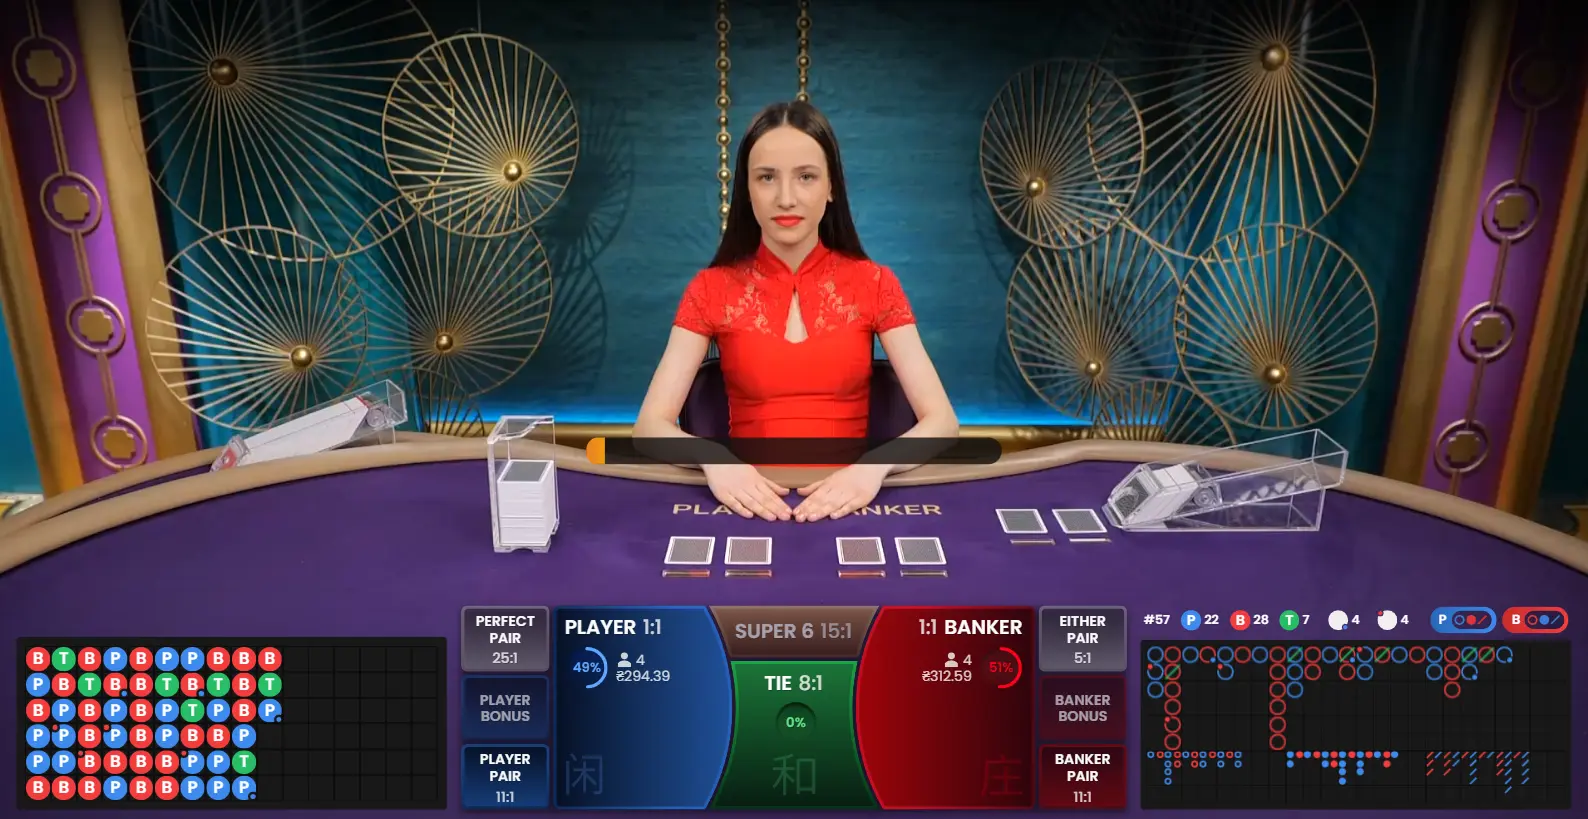 With cards fanned out perfectly, the dealer demonstrates impeccable skill sliding out new cards from the shoe to continually keep the baccarat action running fluidly.